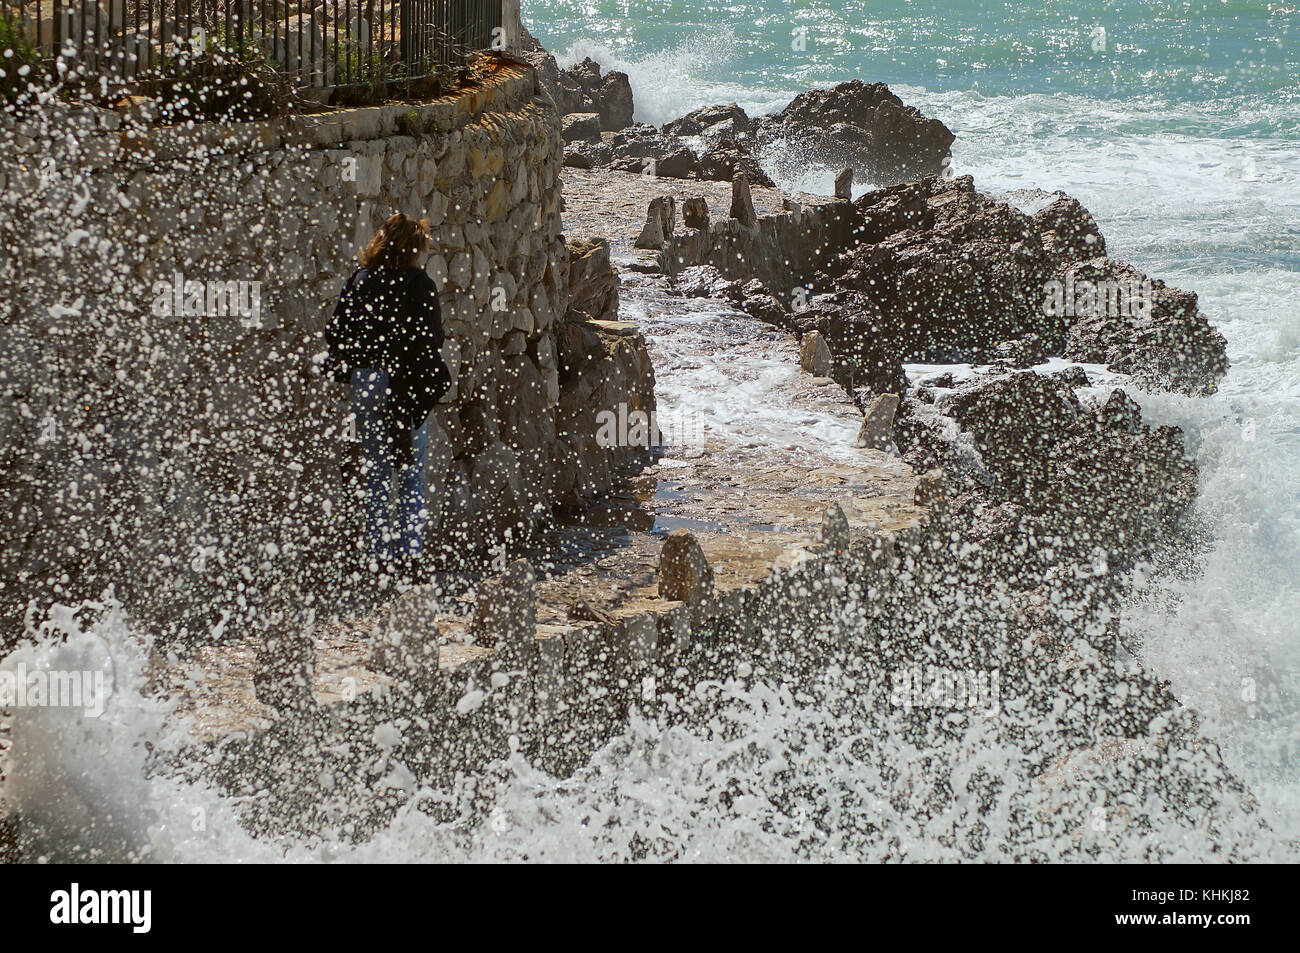 Woman walking on a dangerous path on the coast during a sea storm. Stock Photo